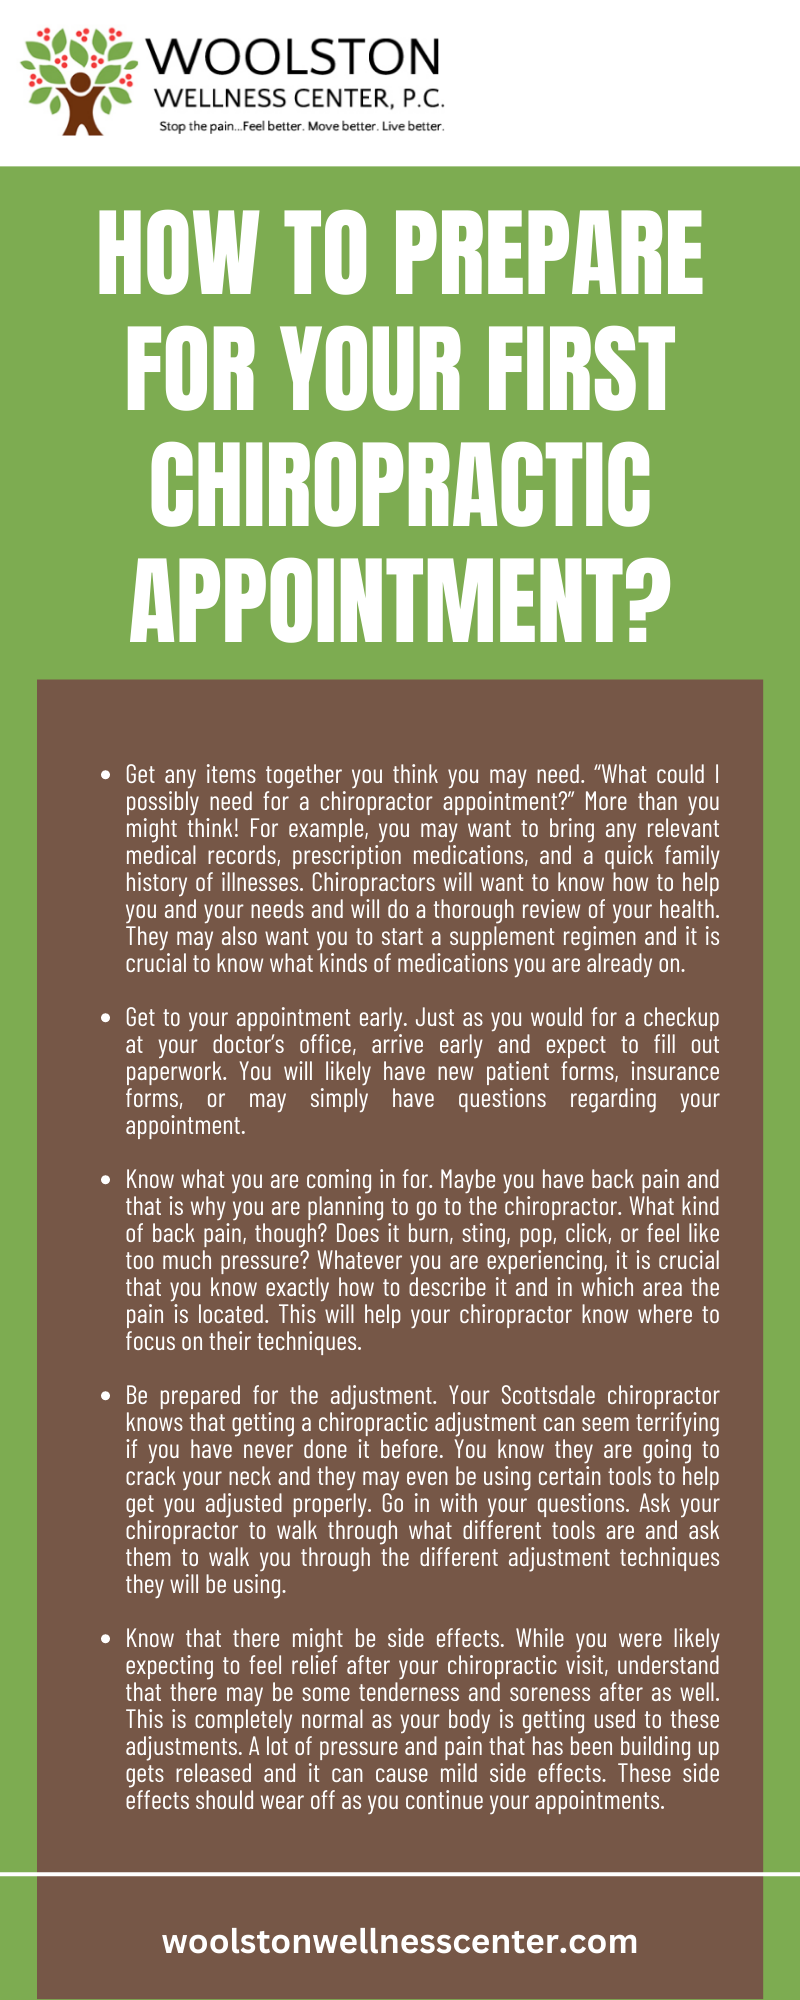 How To Prepare For Your First Chiropractic Appointment Infographic